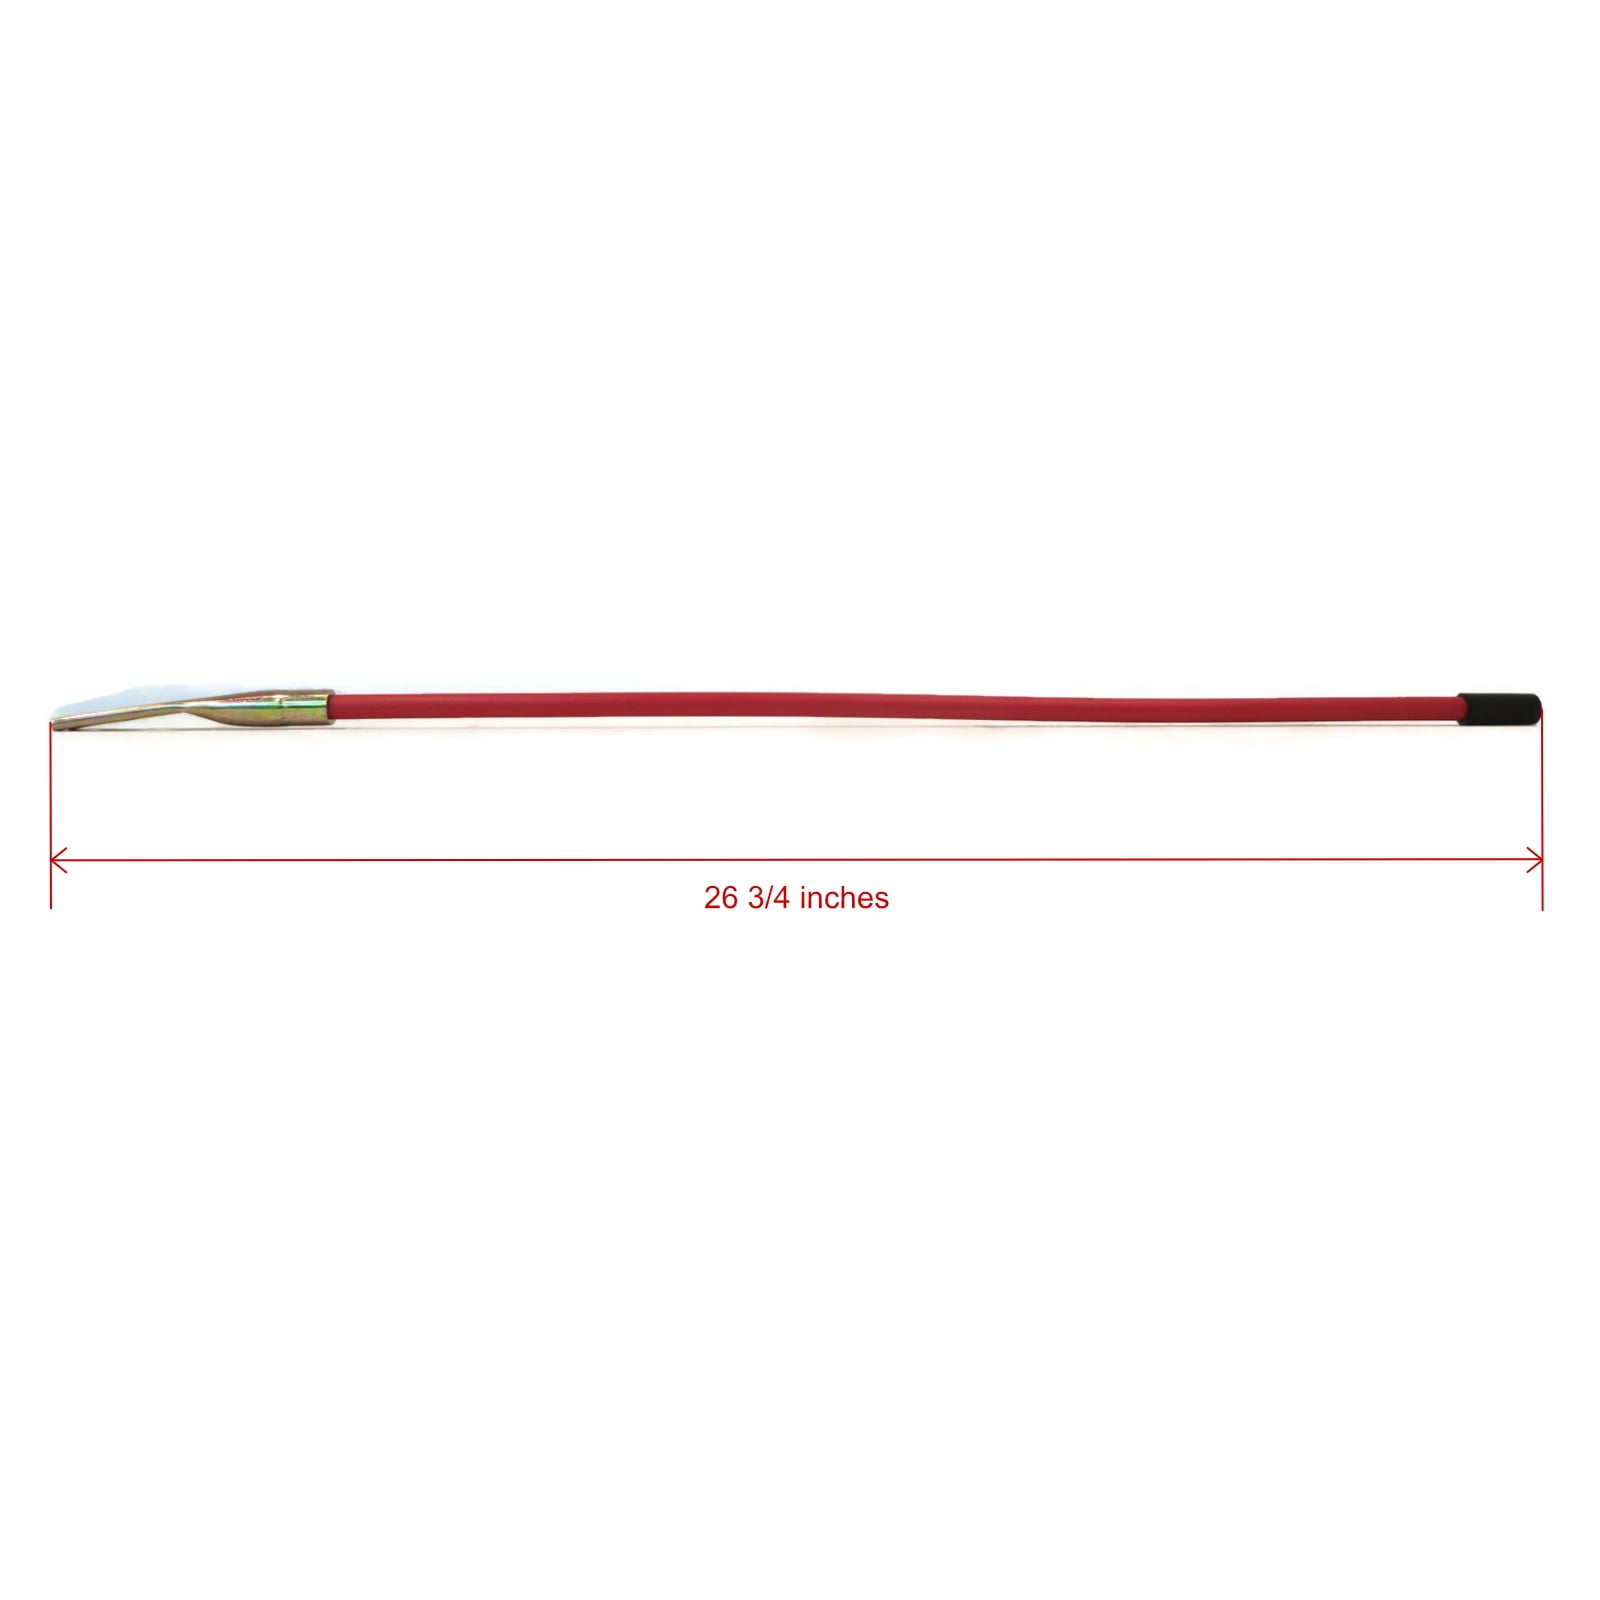 Professional Parts Warehouse Aftermarket 62265 Western Red Blade Guide Sticks Pair With Mounting Hardware 